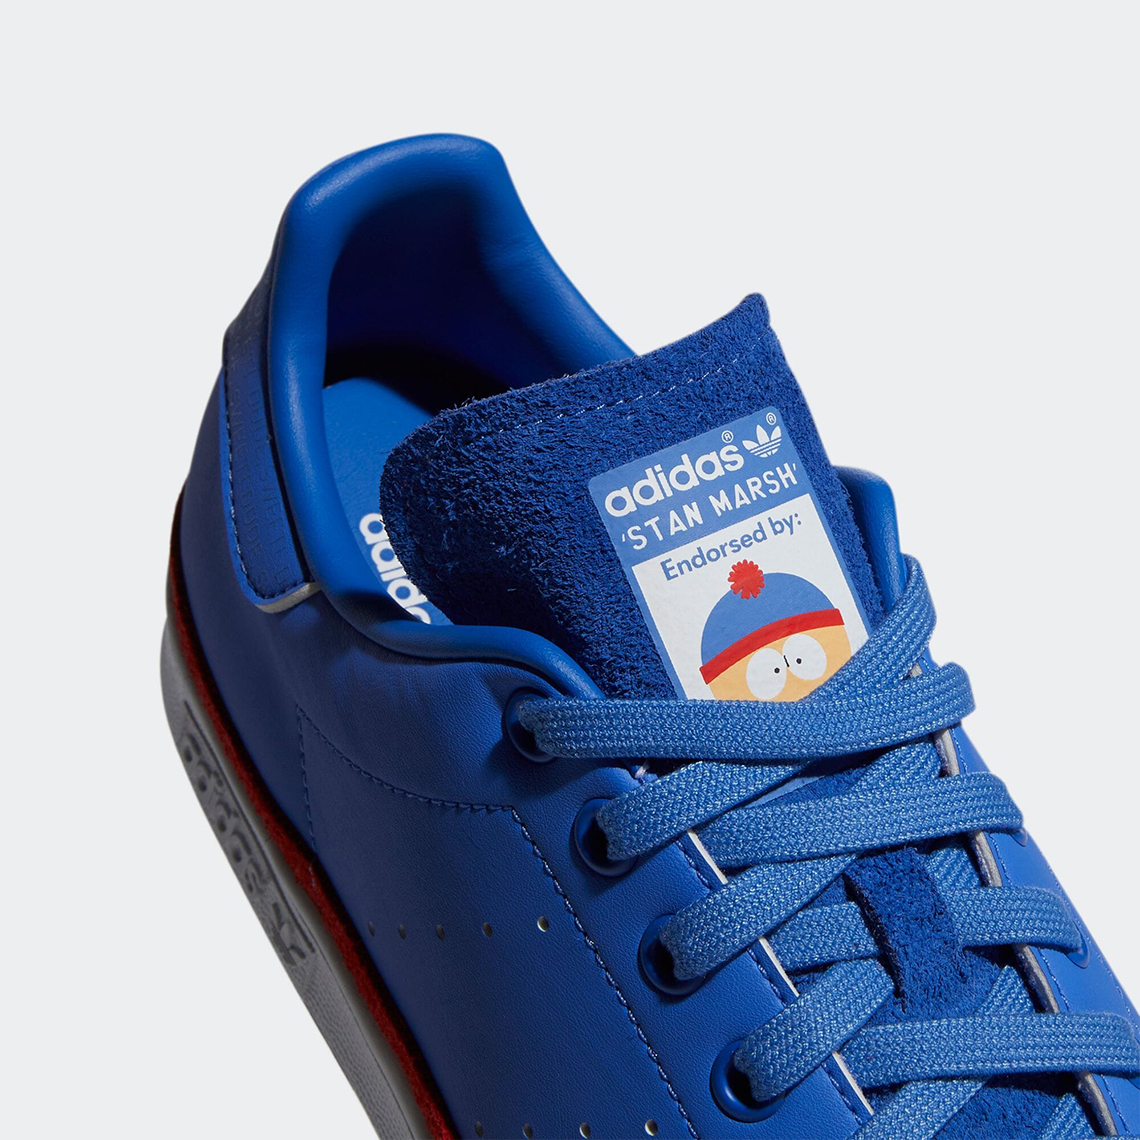 South Park Adidas Stan Smith Stan Marsh Gy6491 Release Date 5